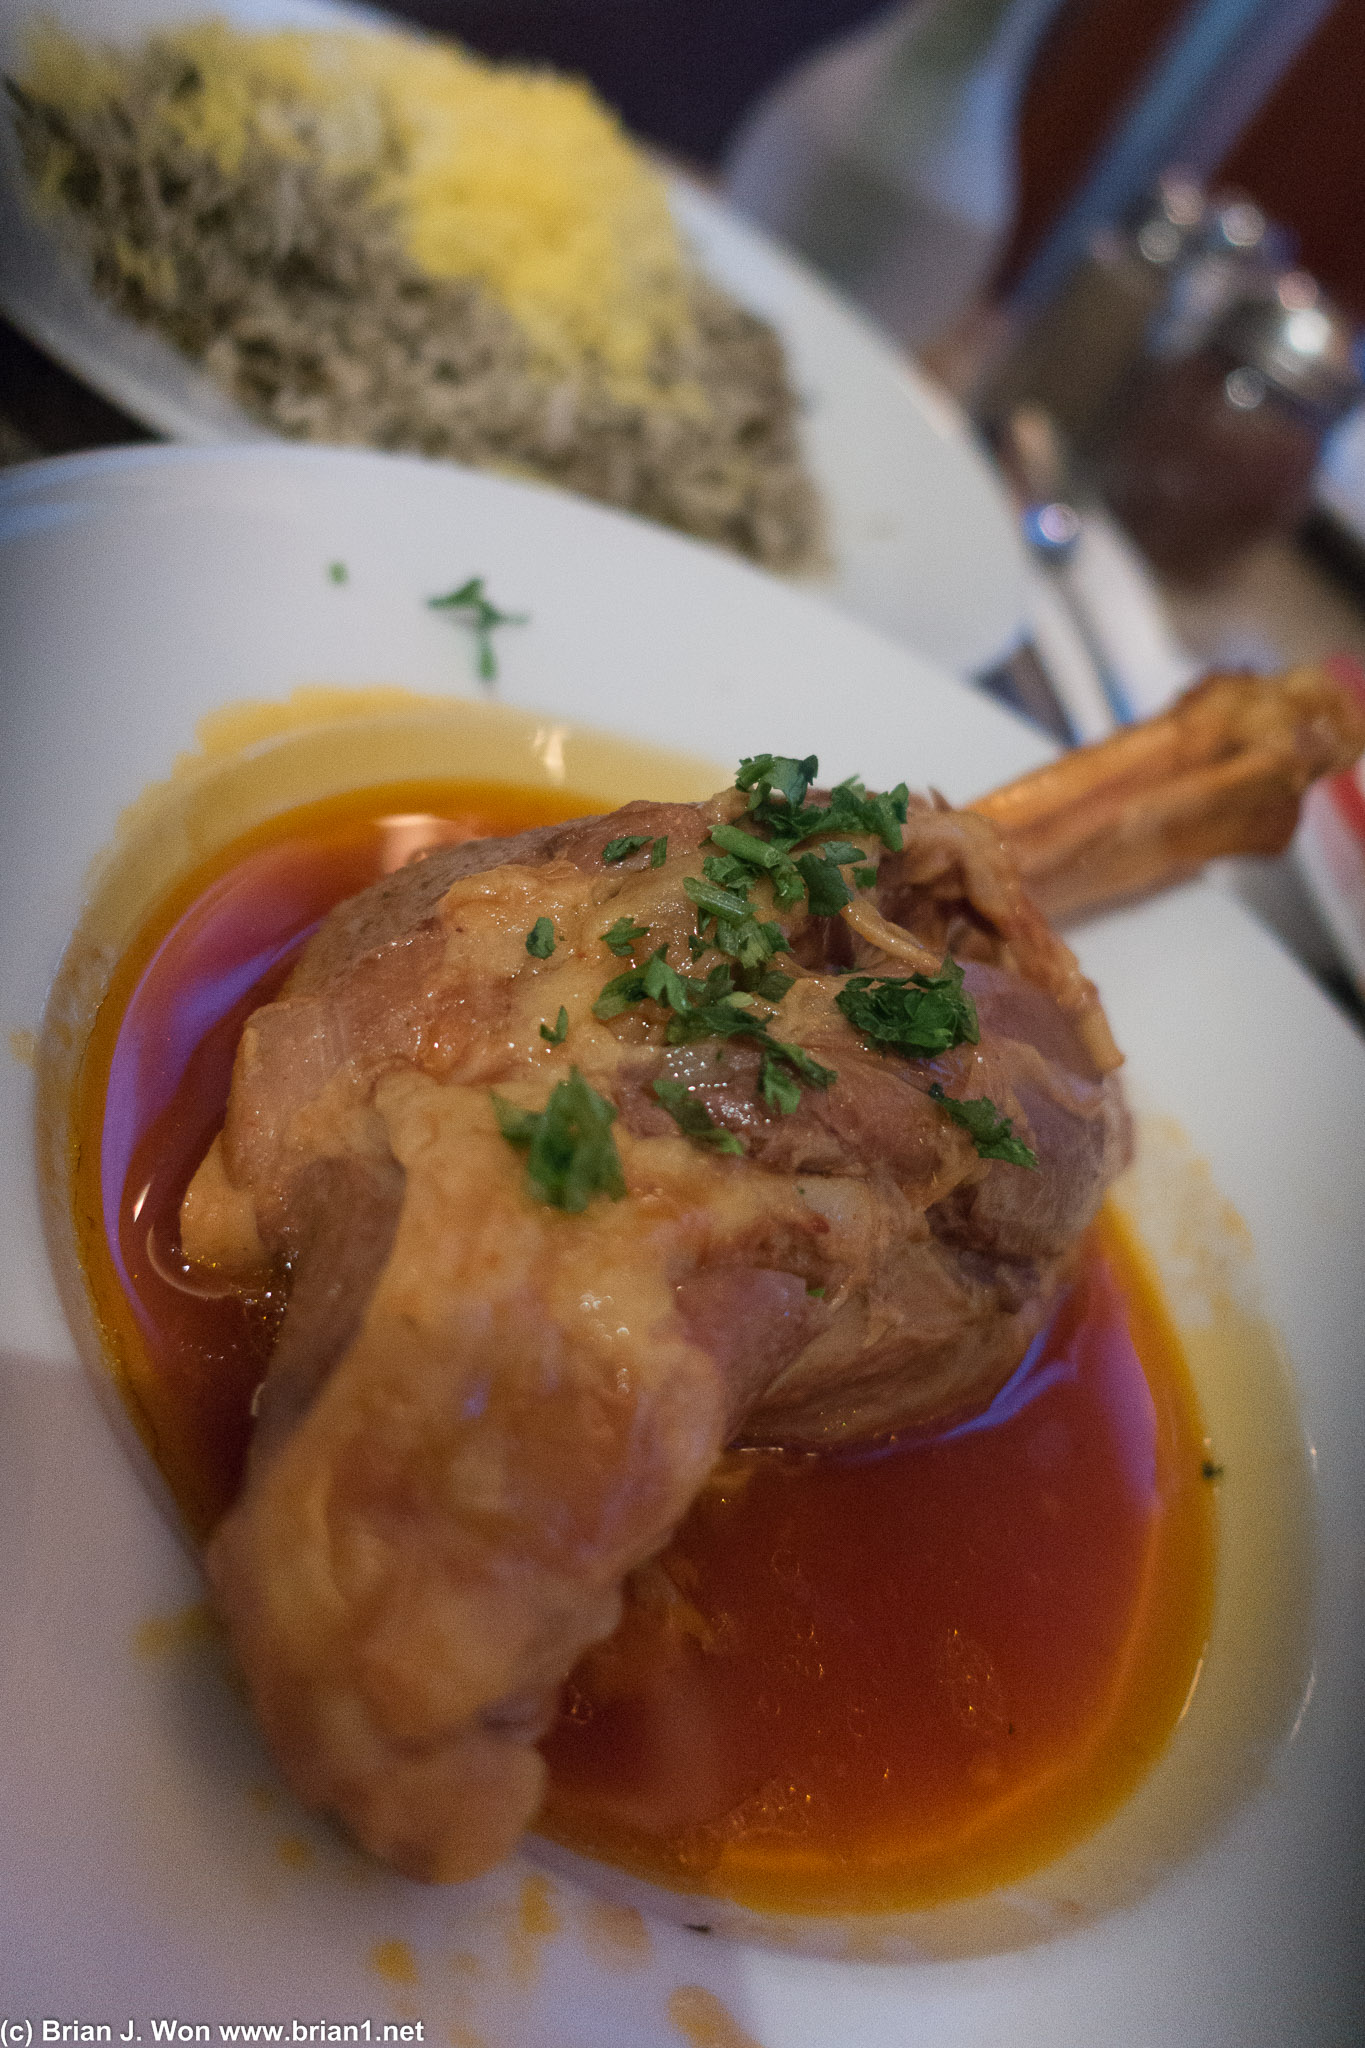 Eric's lamb shank. Came out in like 2 minutes- they must have a tray full of them standing by!